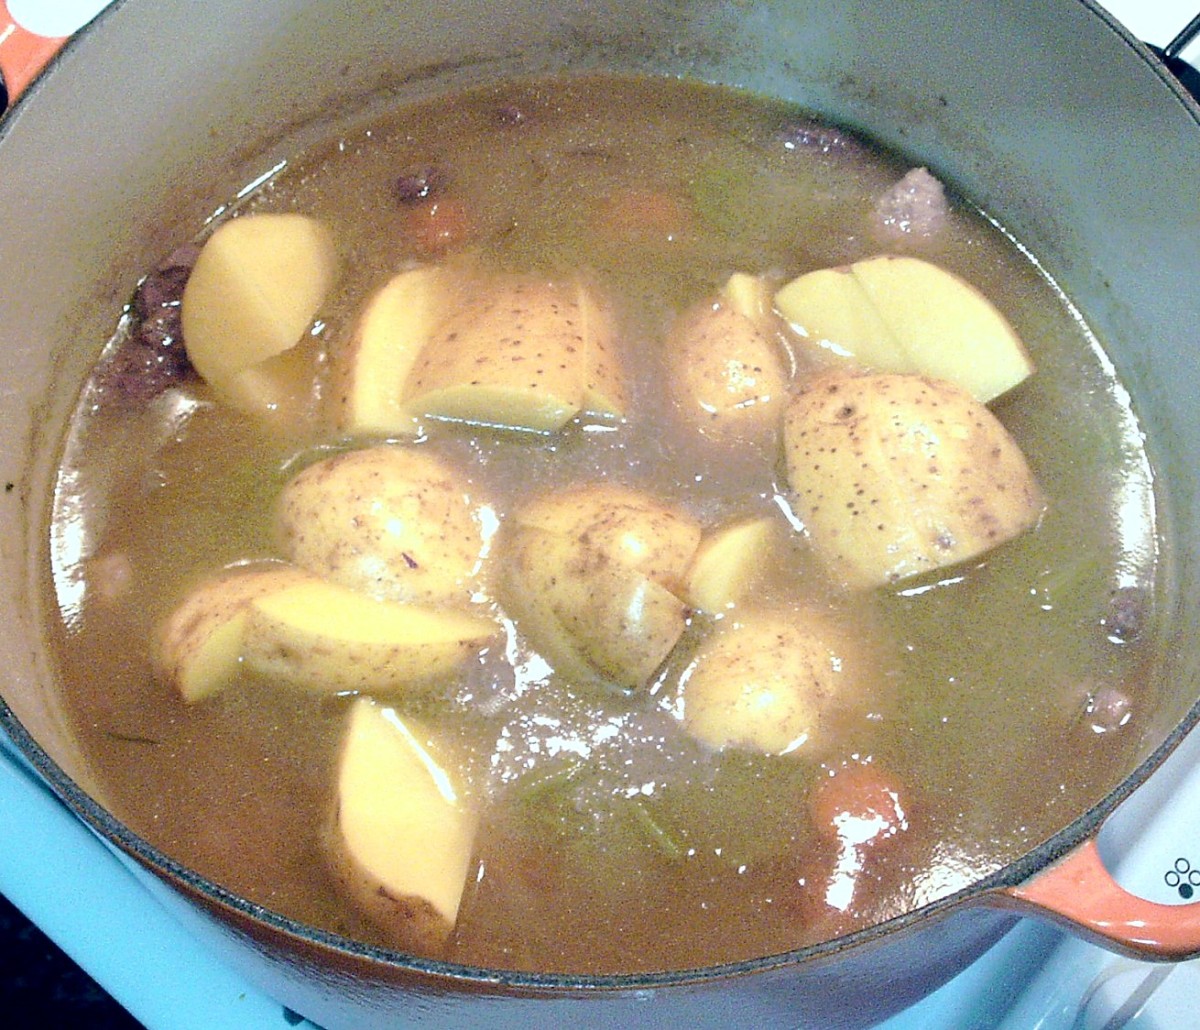 Chunks of potato are added to part cooked stew